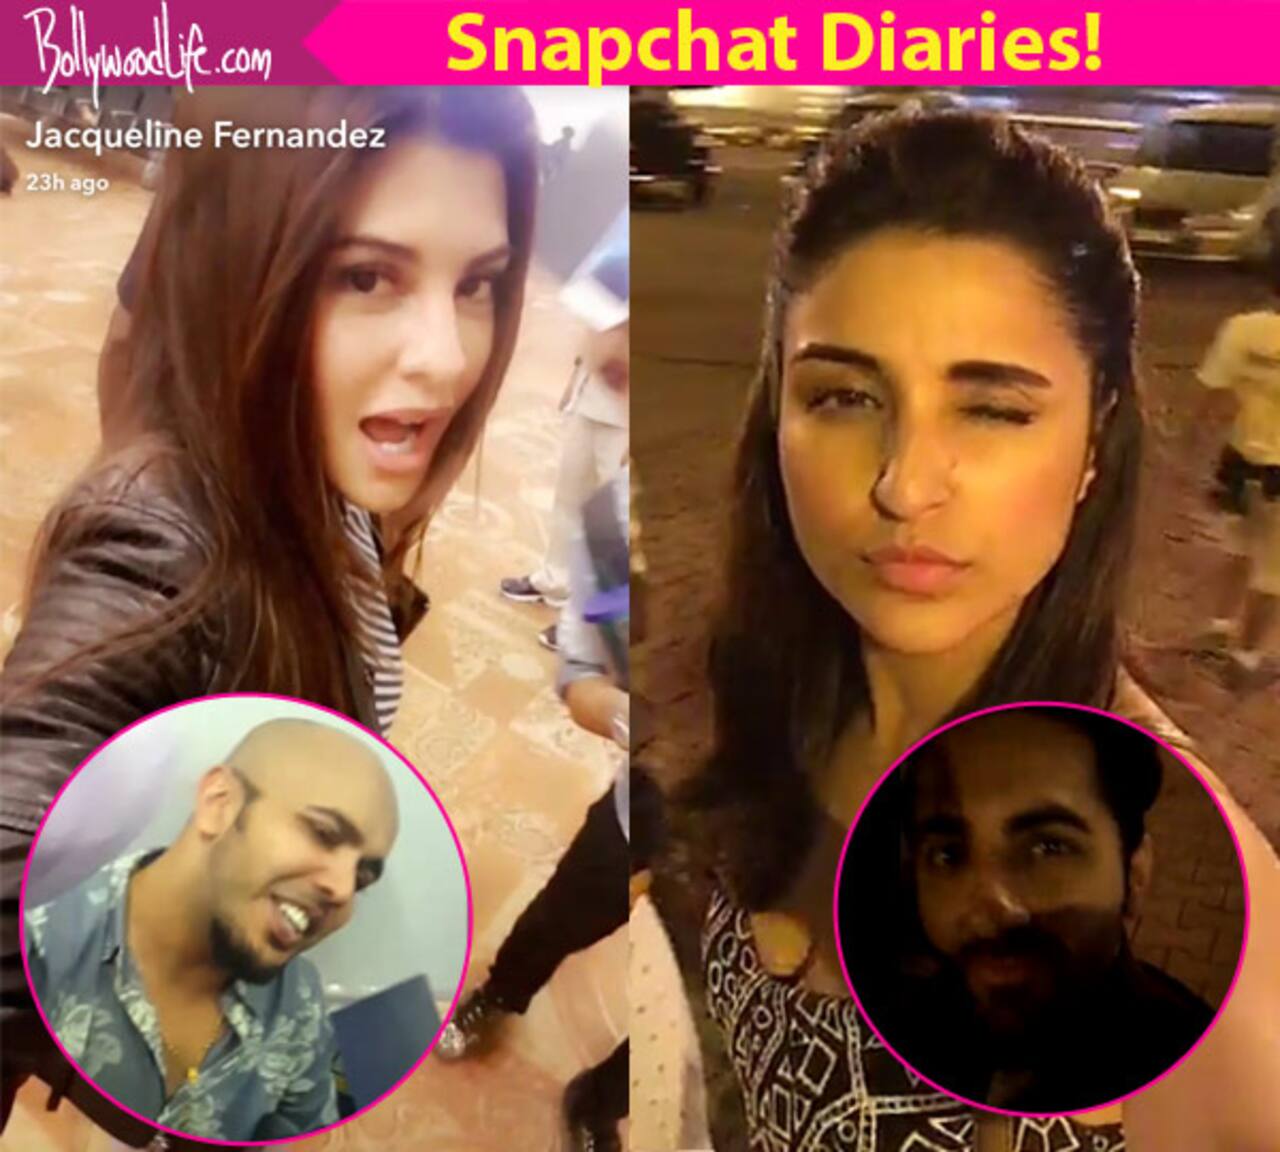 Jacqueline Fernandez and Parineeti Chopra are keeping their crew entertained with their quirky antics - watch video